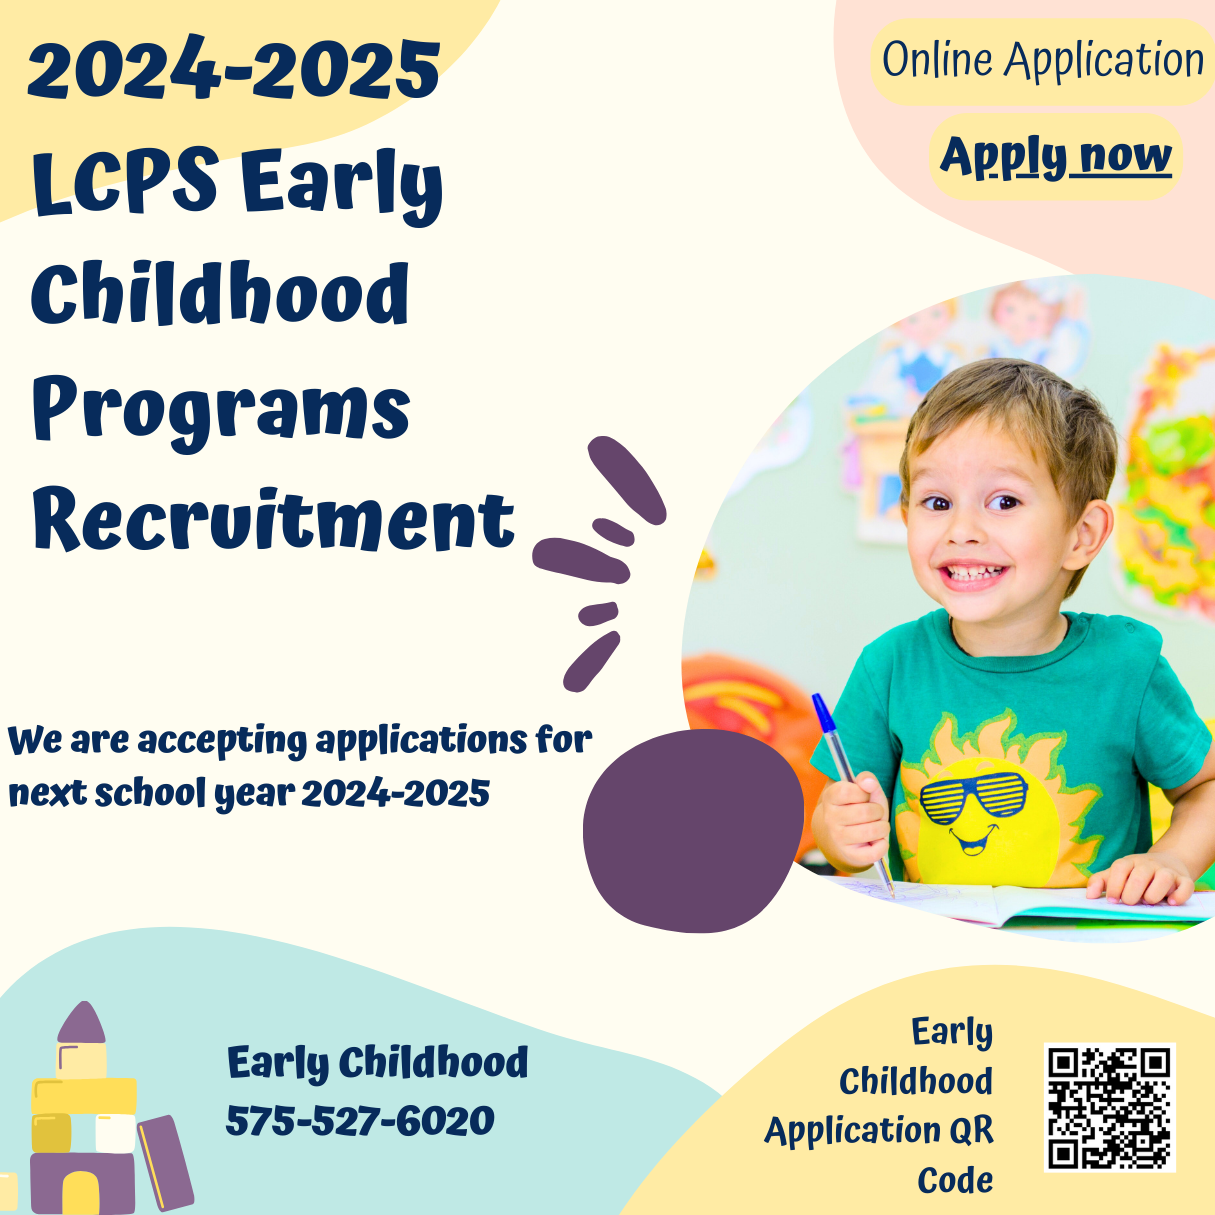 We are accepting applications for next school year 2024-2025. For NM PreK, your child must be 3 or 4 years old before Sept. 1, 2024. For Head Start, your child must be 3 or 4 years old before Sept 1, 2024